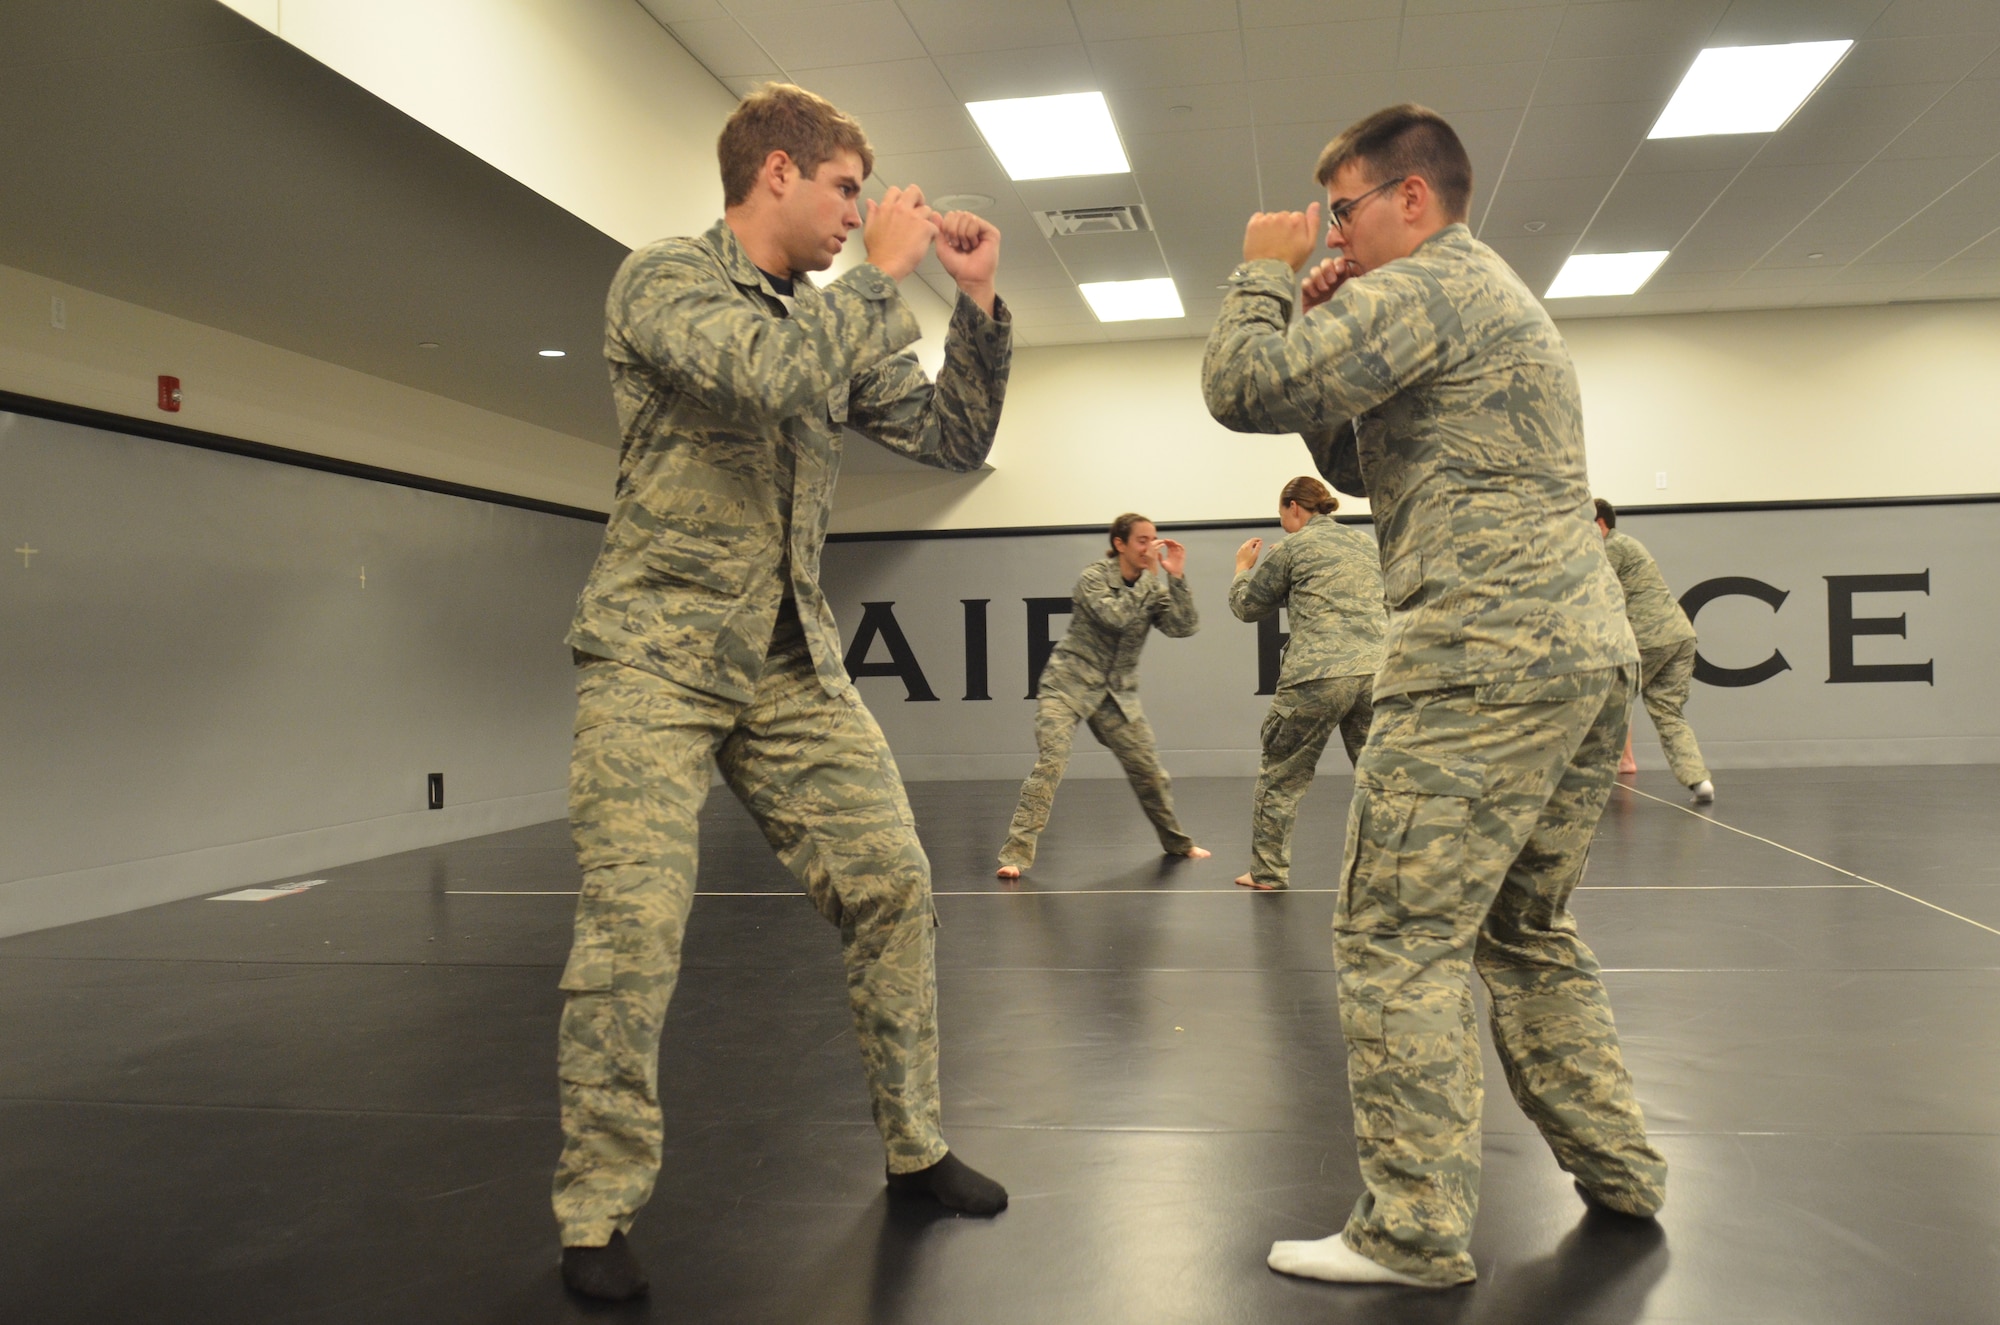 Academy cadets Jackson Bell (left) and Robert Goodno spar during the Academy's Combatives course here Sept. 19. The three-part course is a graduation requirement for cadets. (Air Force photo/Amber Baillie)